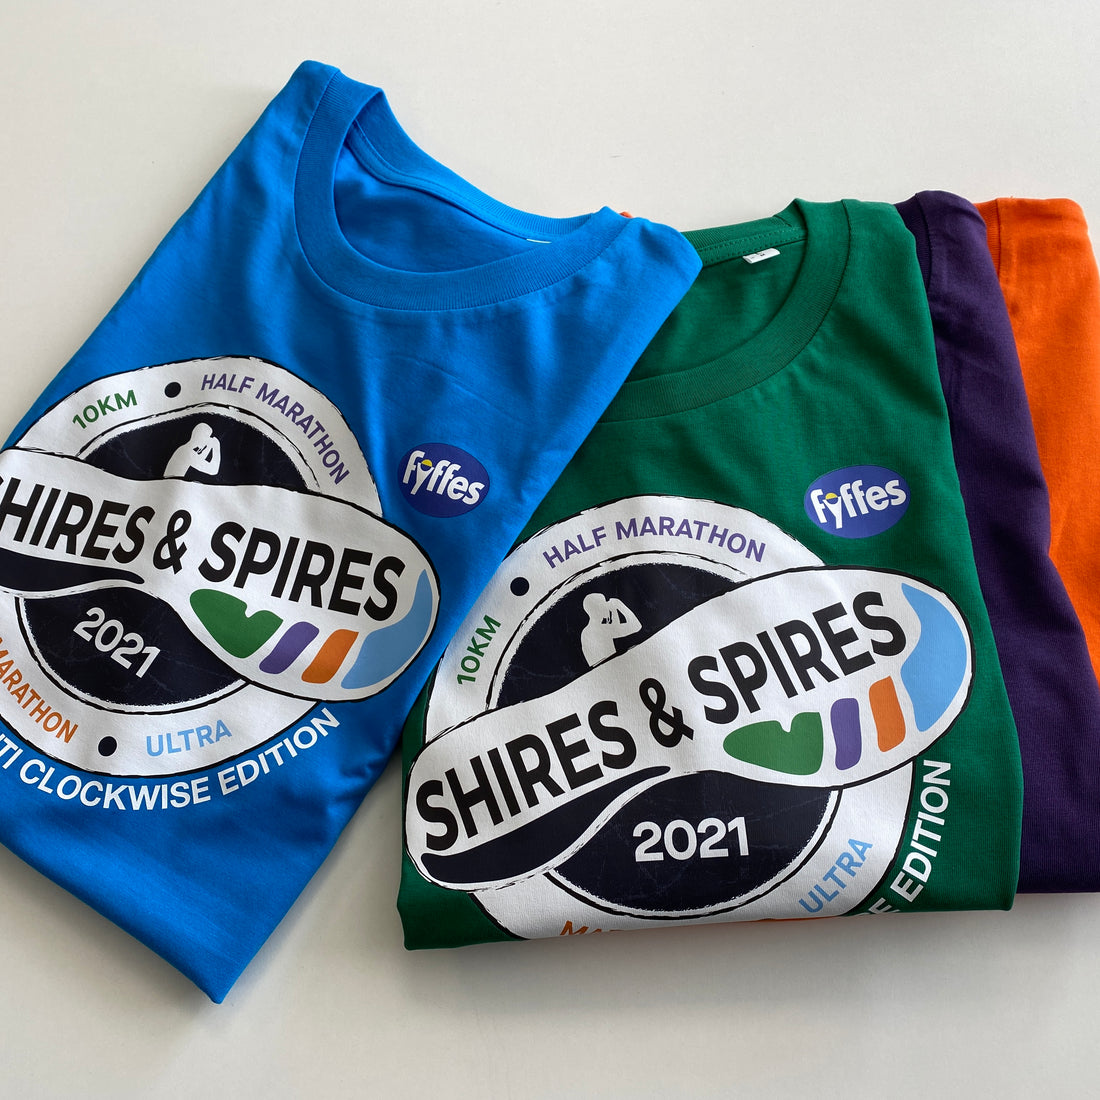 Shires & Spires 2021 Finisher T's